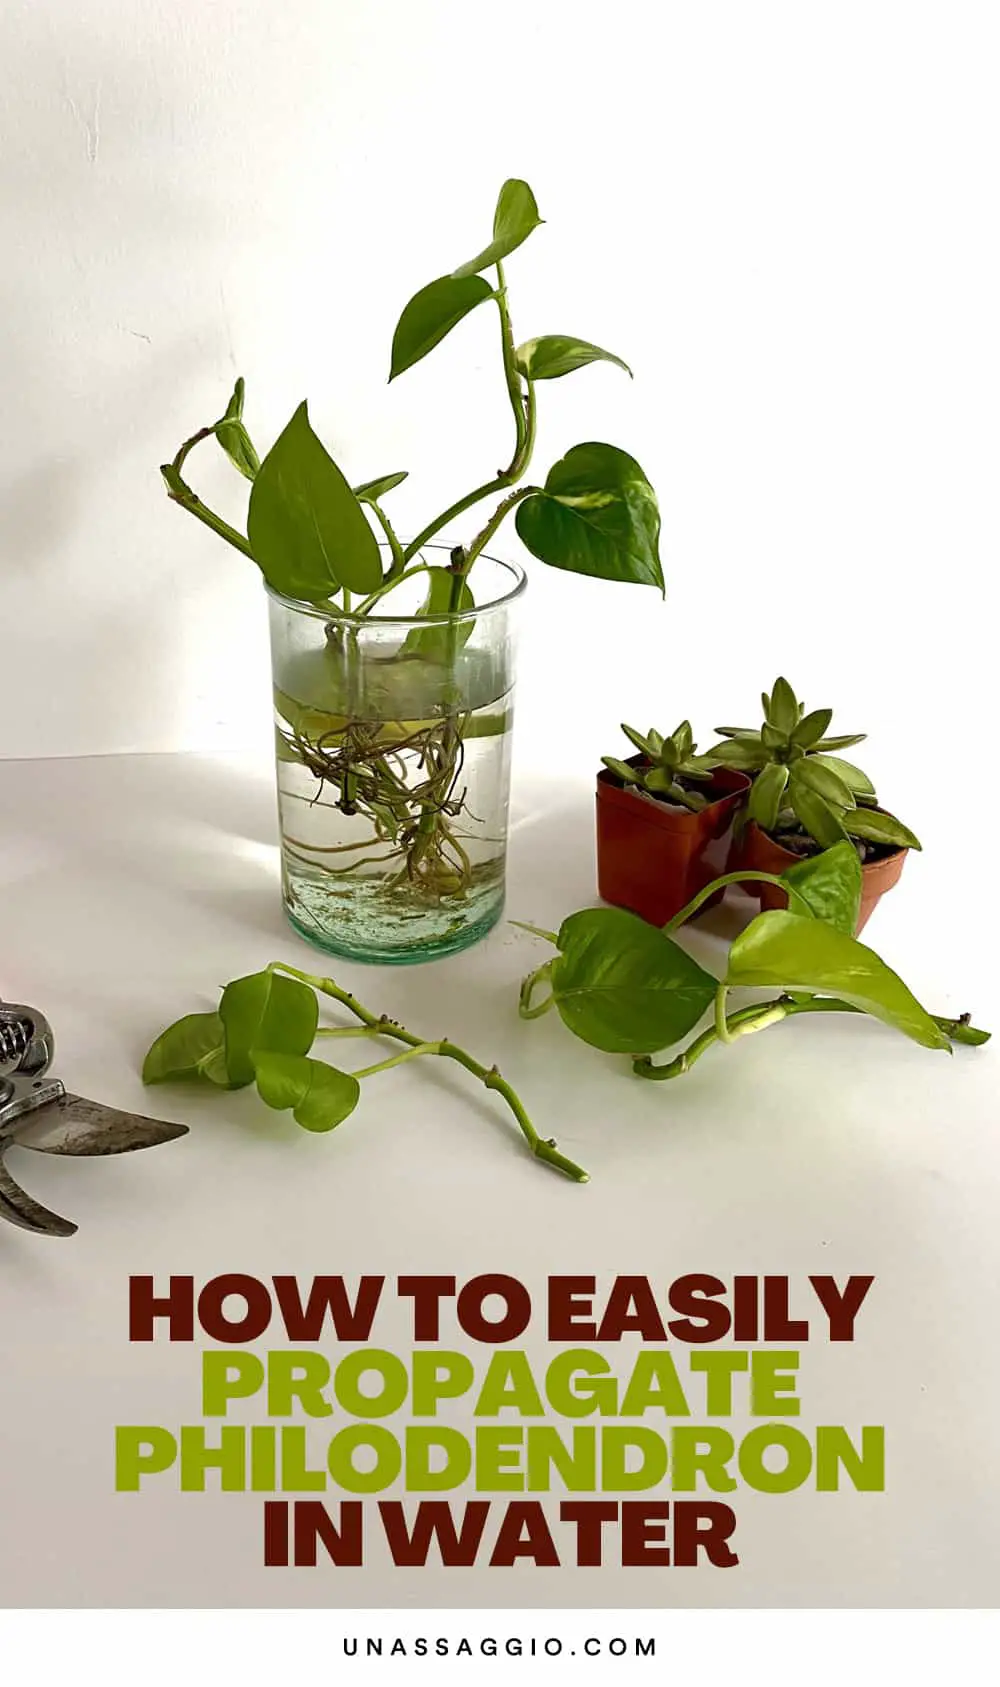 Steps to Propagate The Philodendron In Water